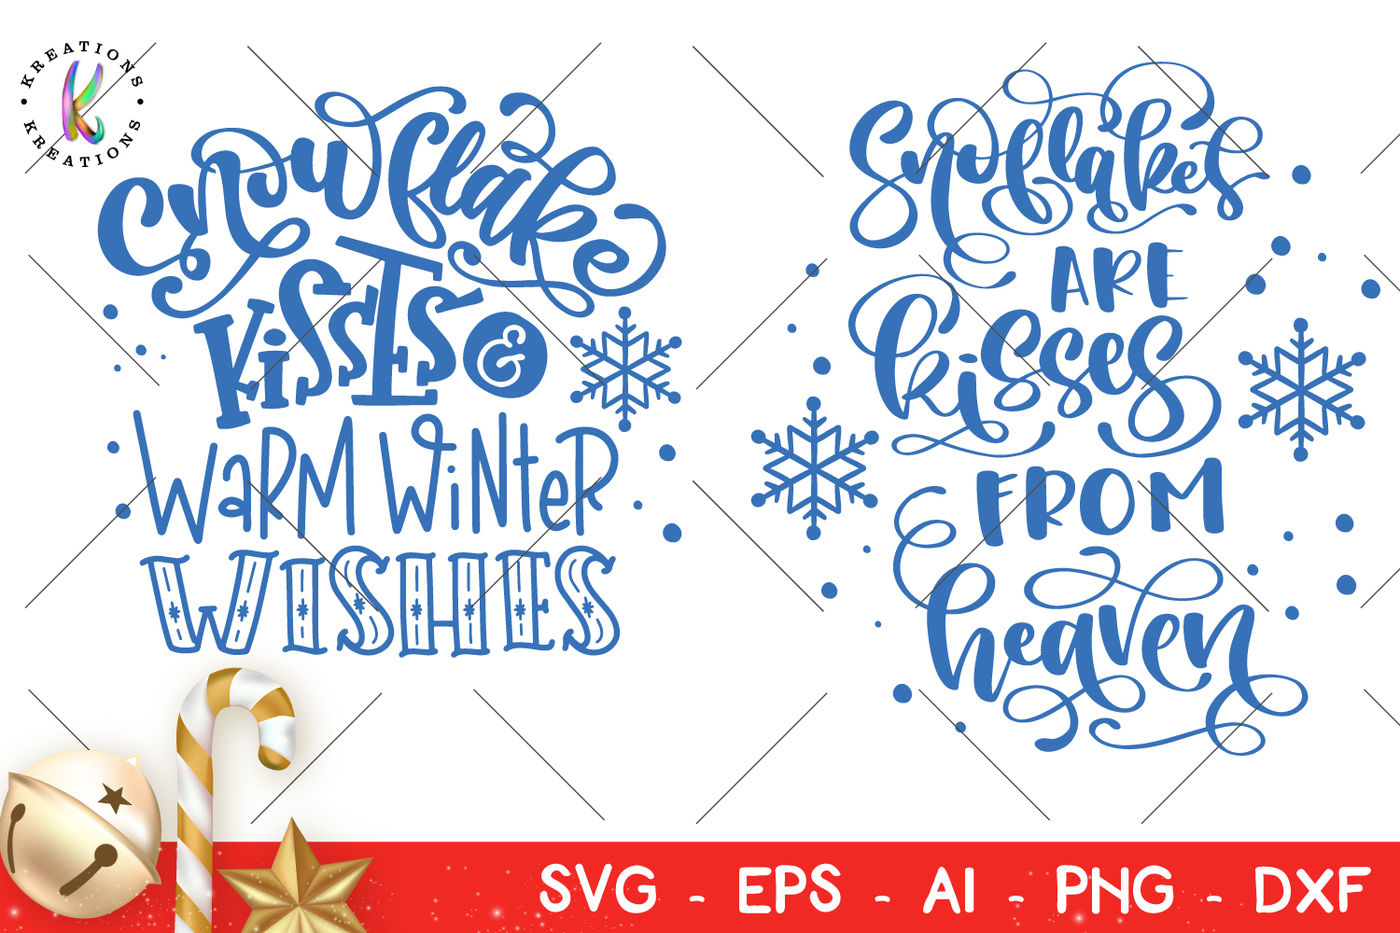 Snowflake Kisses and Warm Winter Wishes svg Christmas quotes svg By